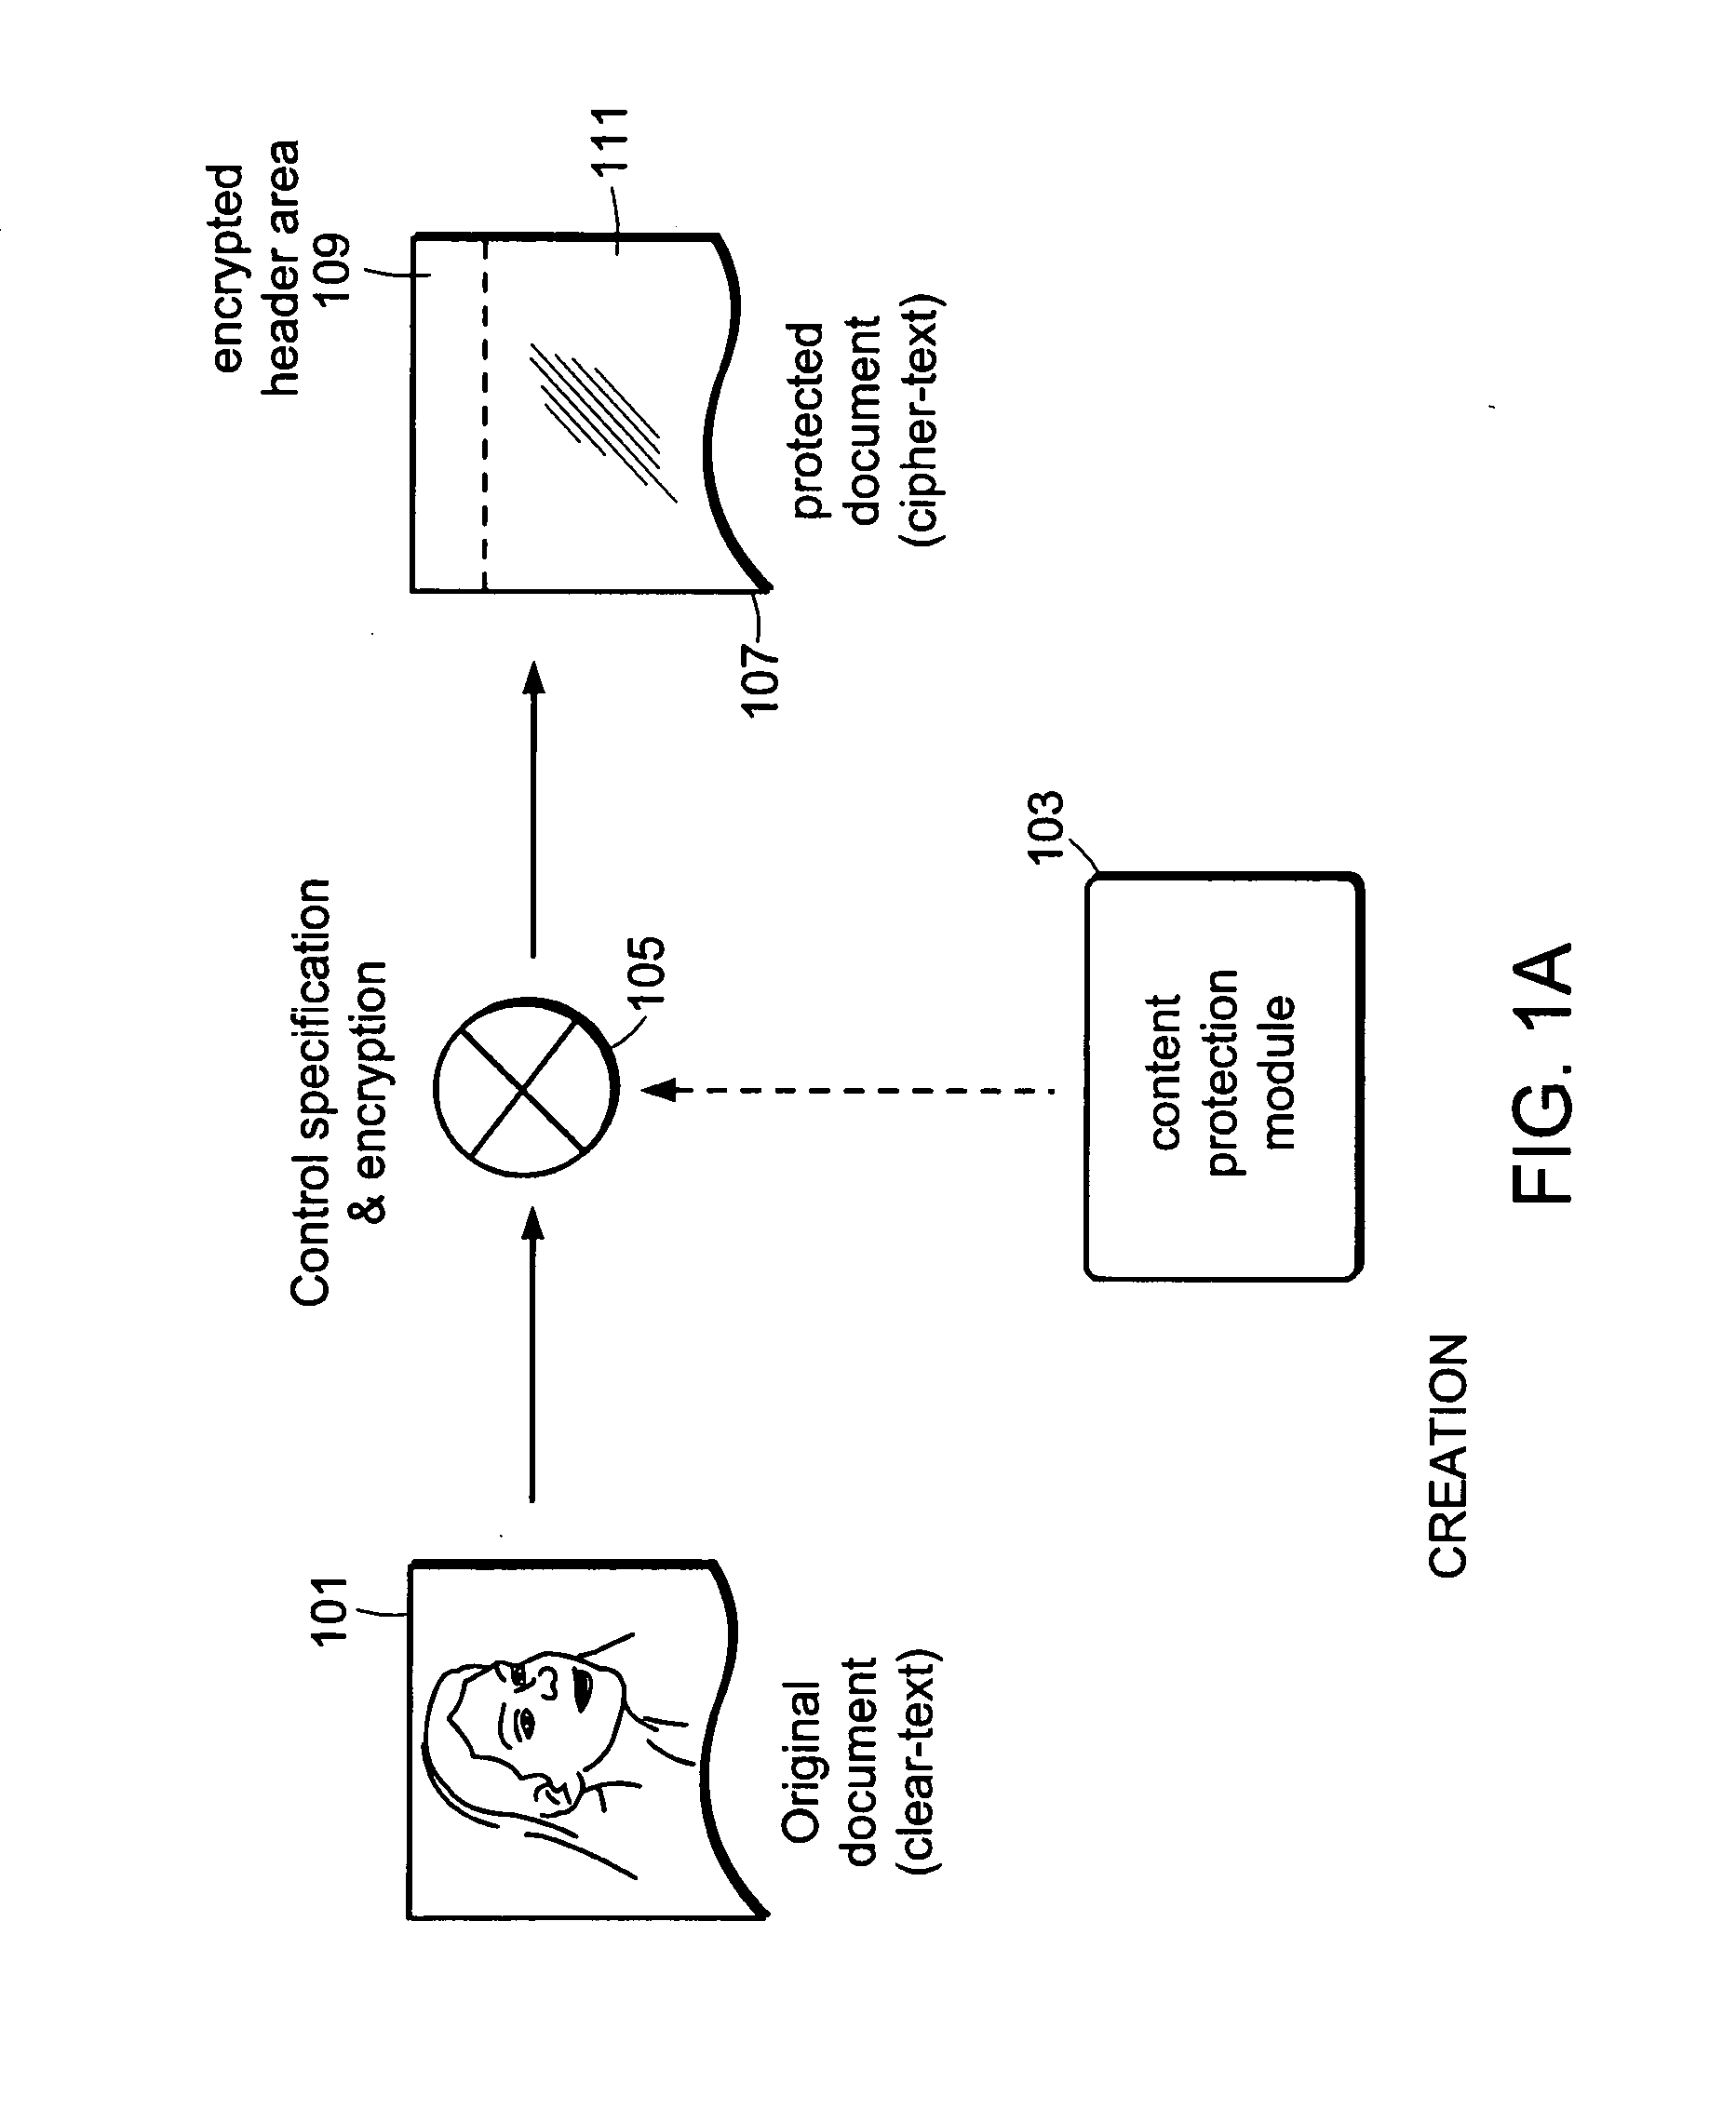 Method for protecting digital content from unauthorized use by automatically and dynamically integrating a content-protection agent